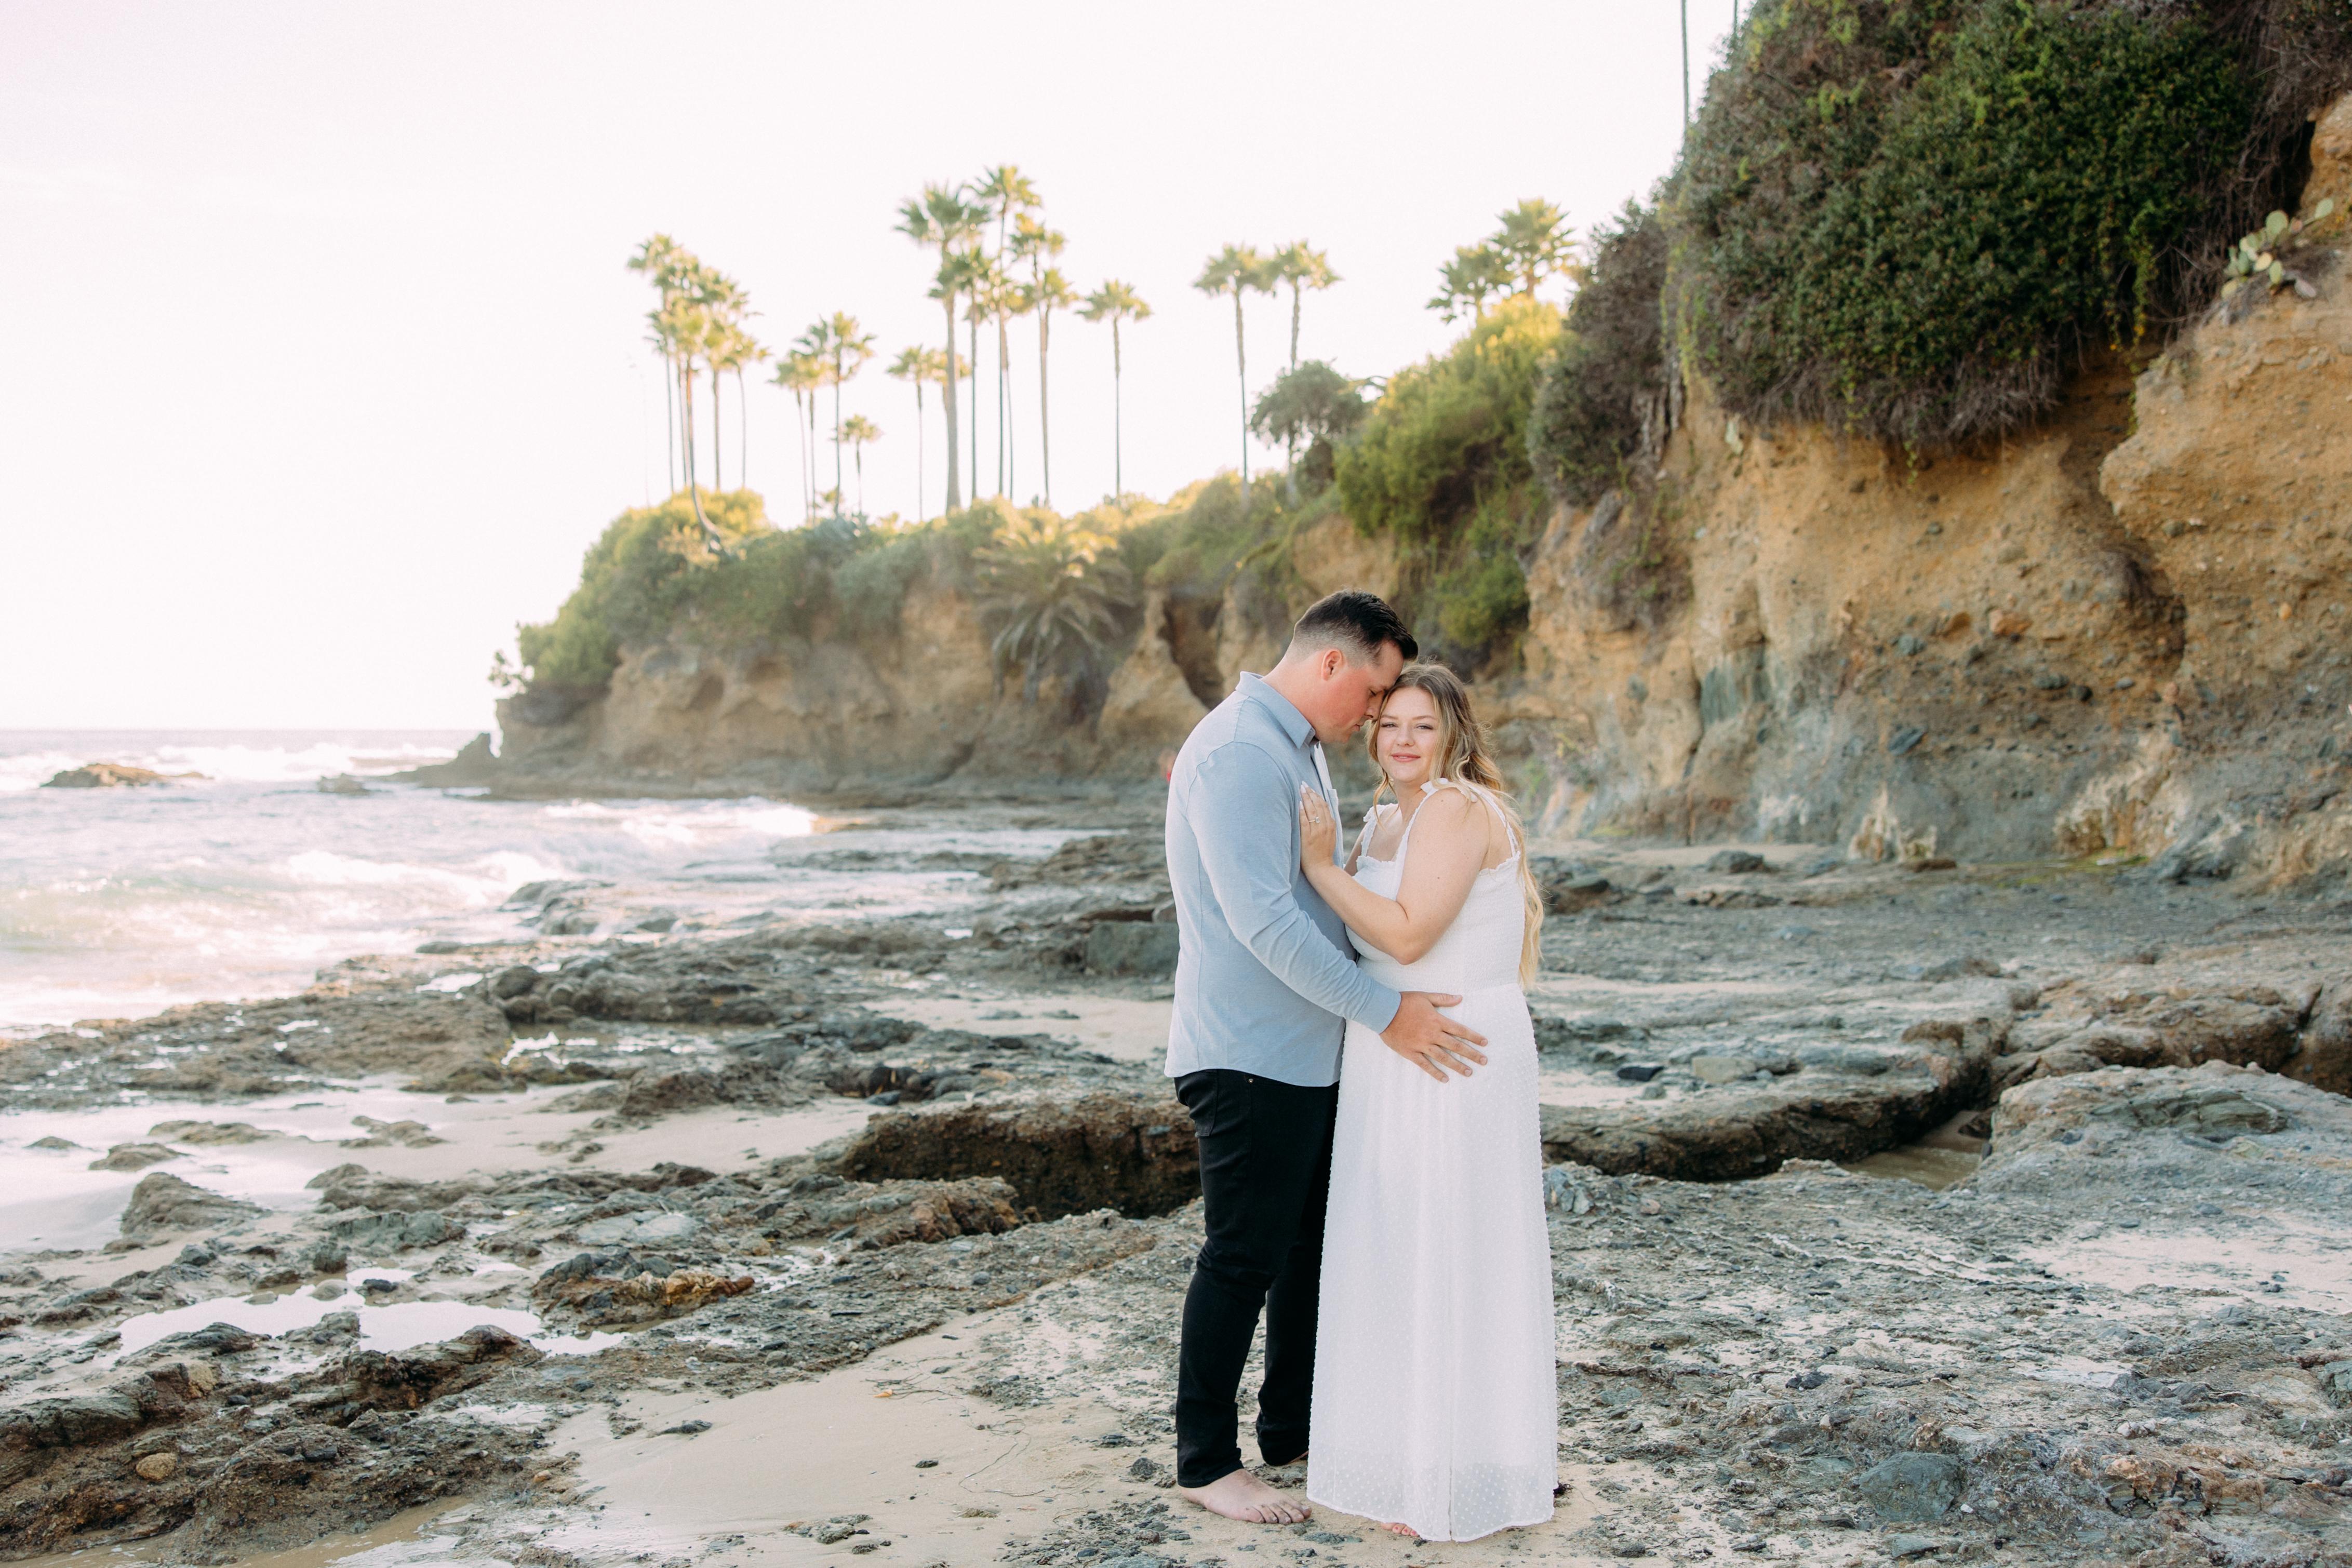 The Wedding Website of Hannah Pollak and Michael Sims